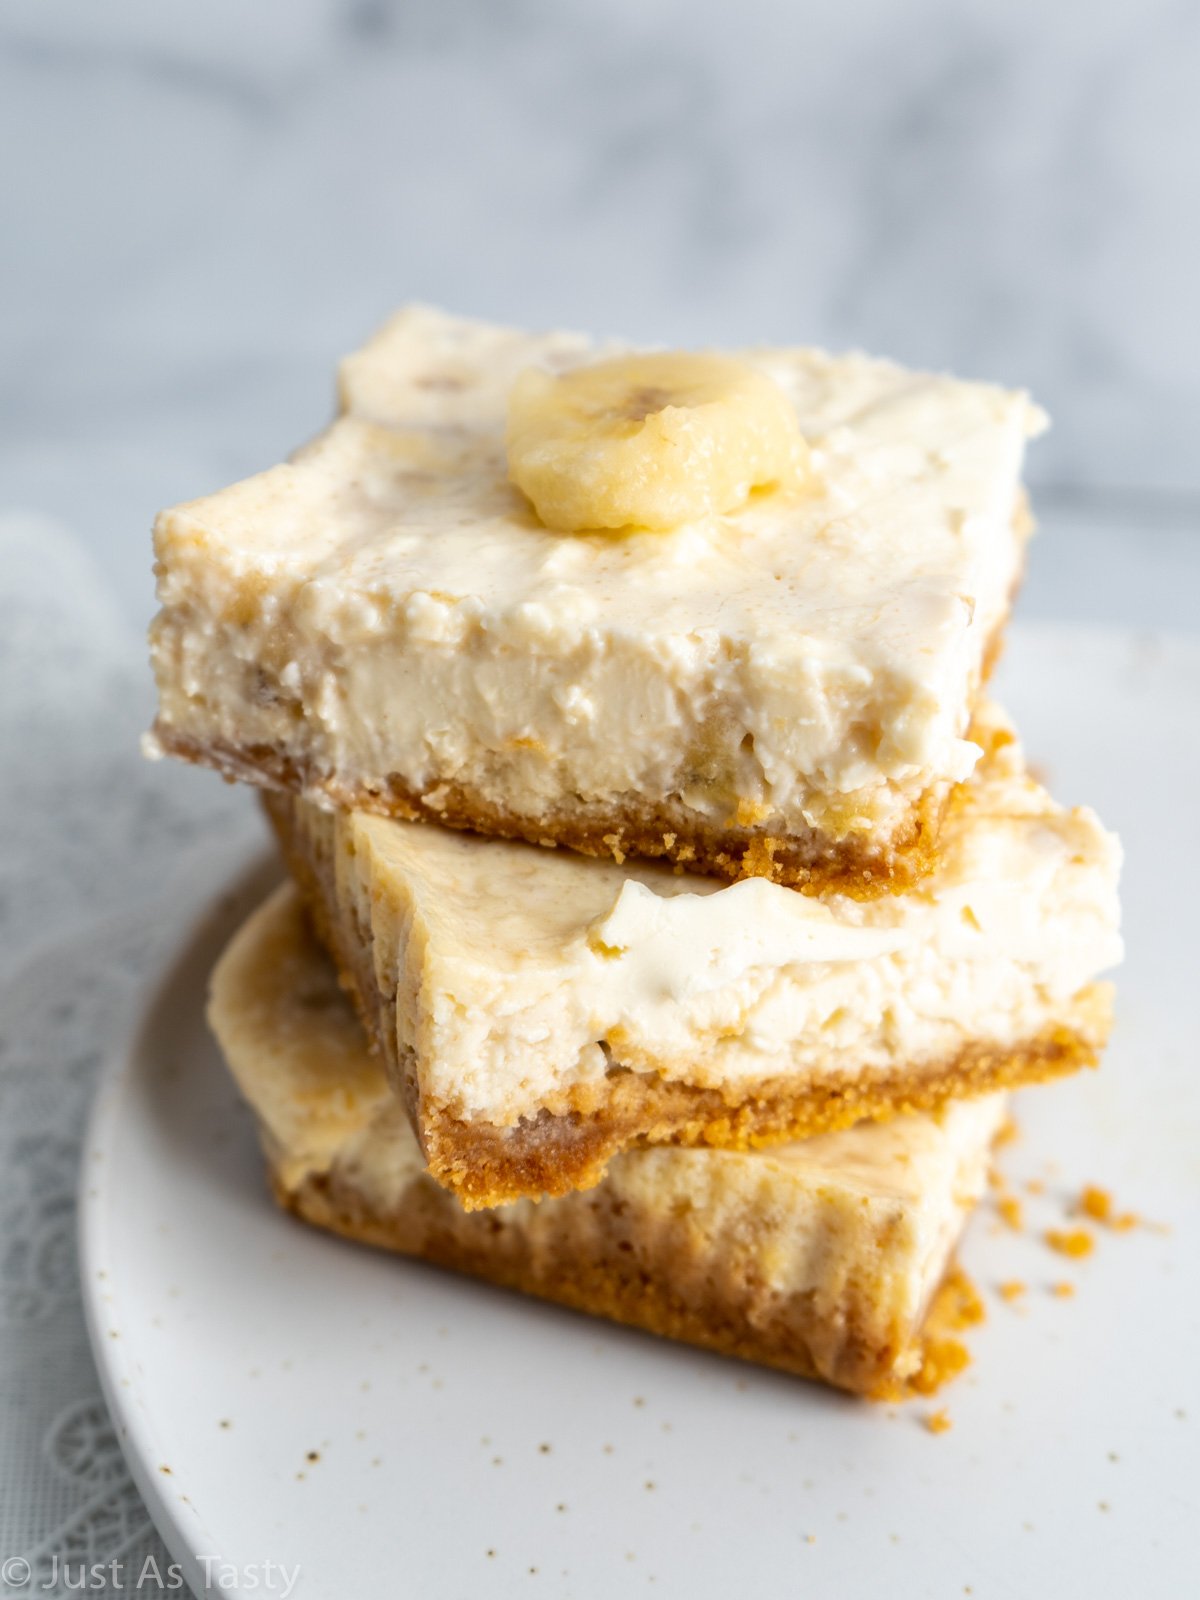 Stack of three banana pudding cheesecake squares on a white plate.